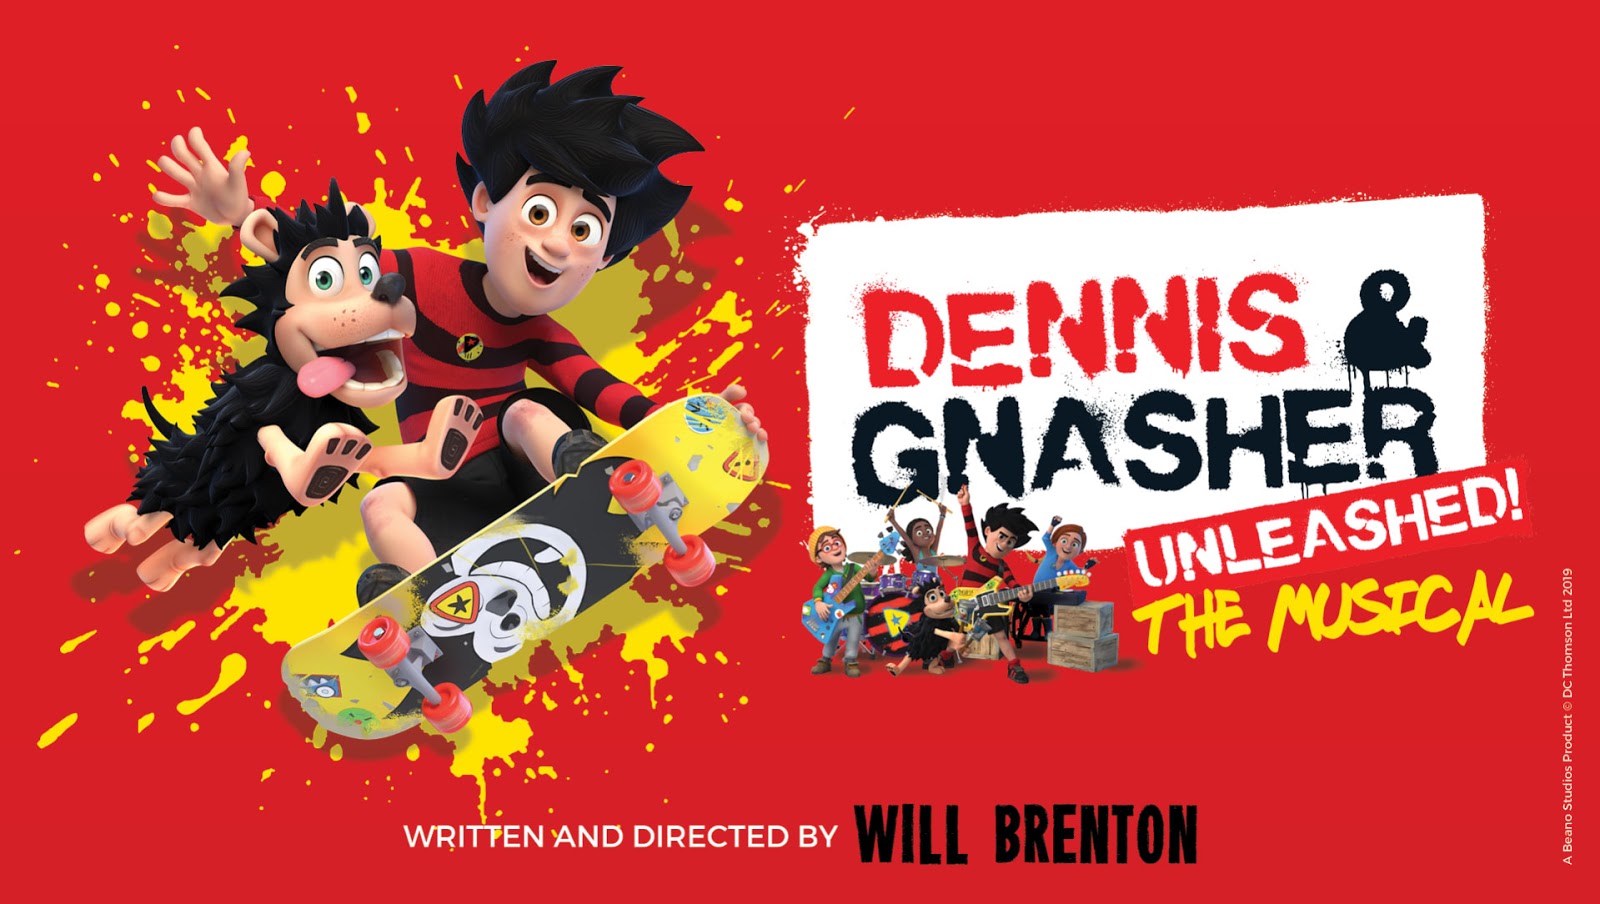 Dennis & Gnasher Unleashed! The Musical